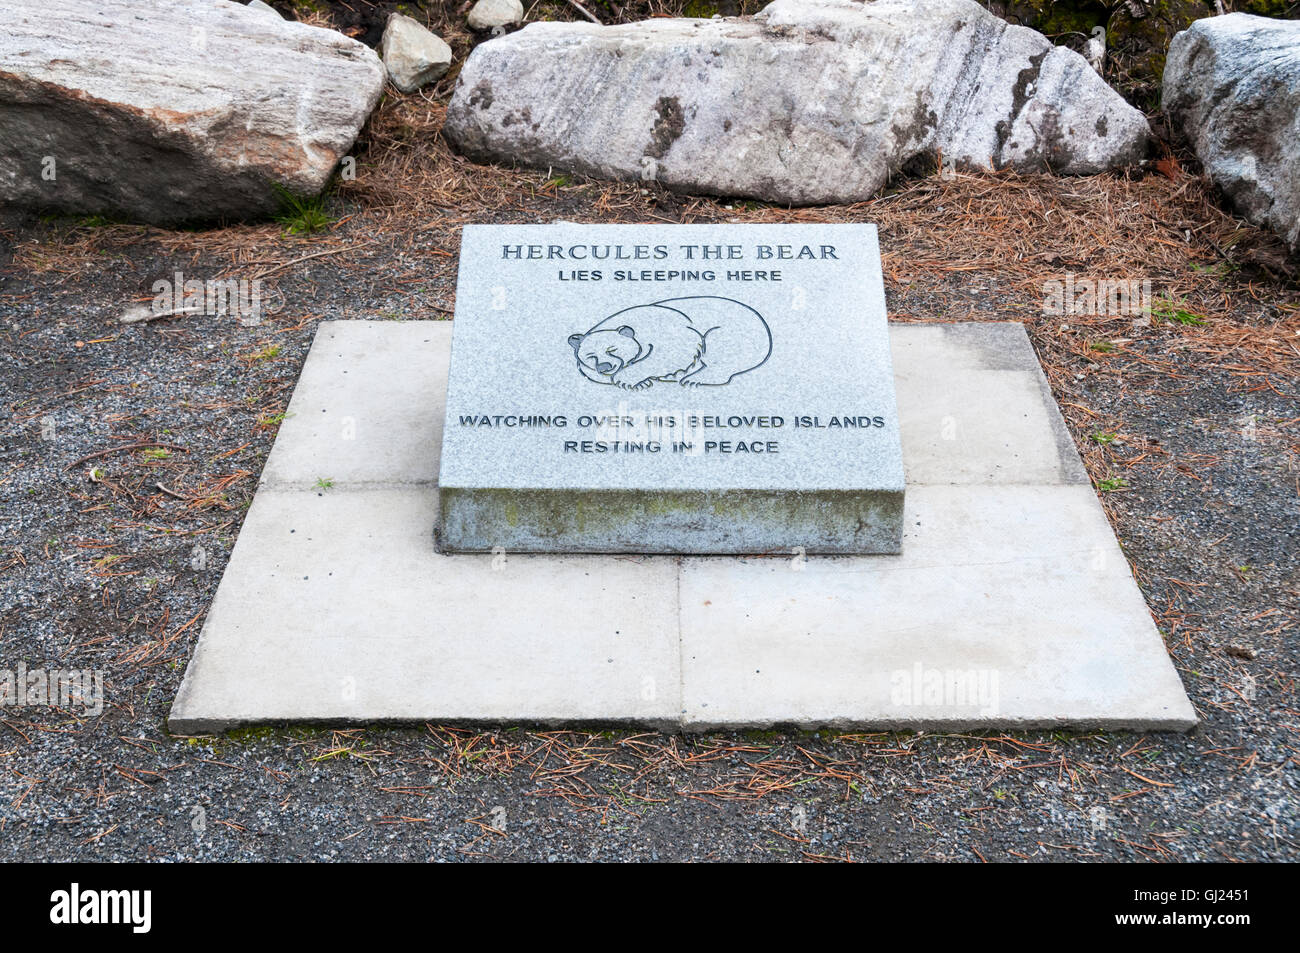 The grave of Hercules the bear in Langass Woods, North Uist. DETAILS IN DESCRIPTION. Stock Photo